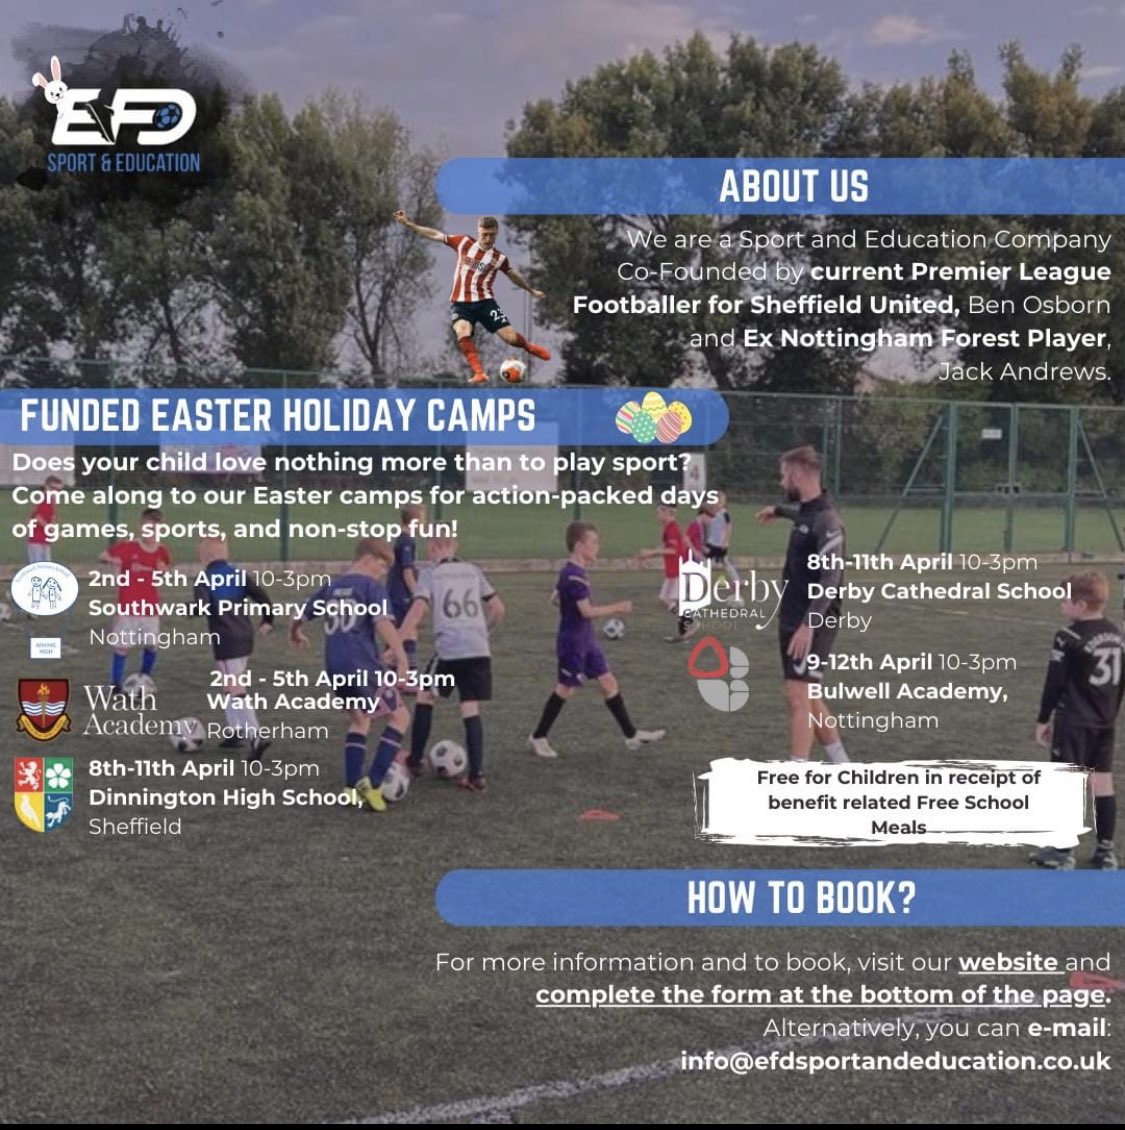 We believe that all children should have the opportunity to participate in sport 🫶🏻. We’re proud to be working with various local authorities to offer our Multi Sport HAF Camps across Derbyshire, Nottinghamshire and South Yorkshire this Easter ⚽️🏏